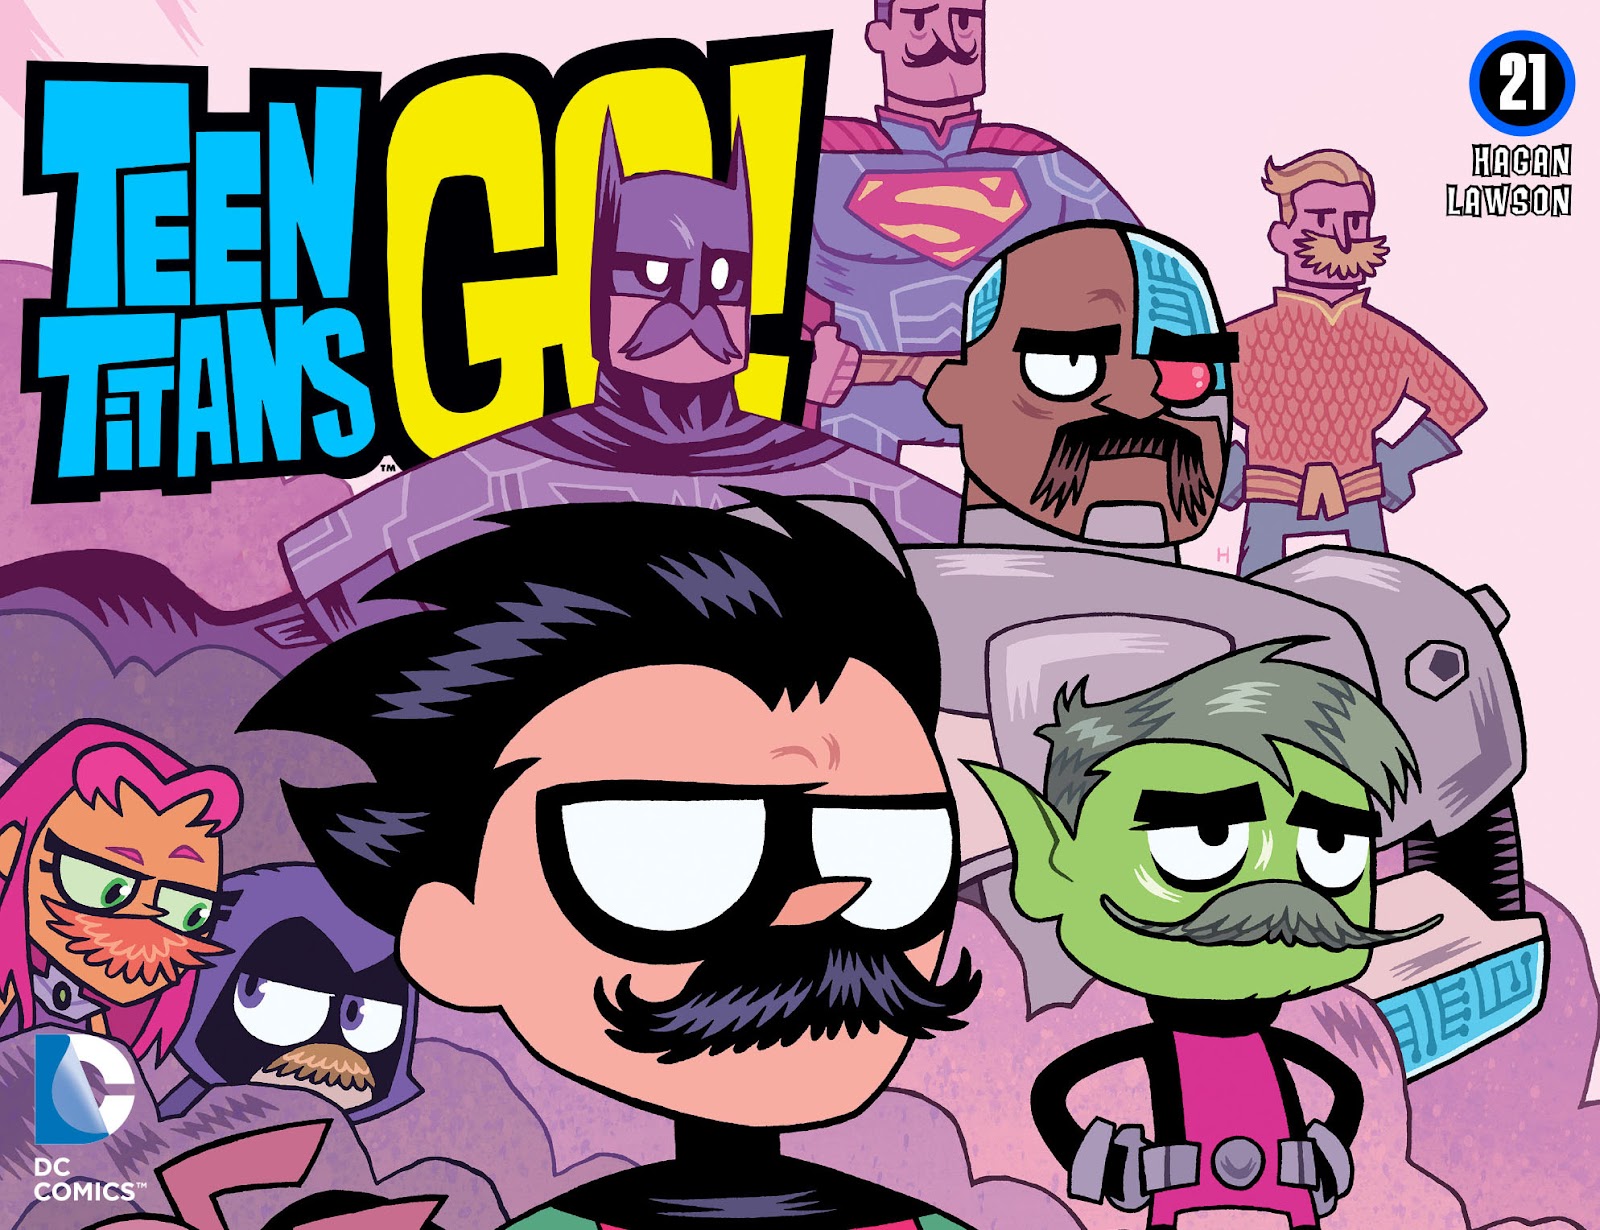 Teen Titans Go! (2013) issue 21 - Page 1